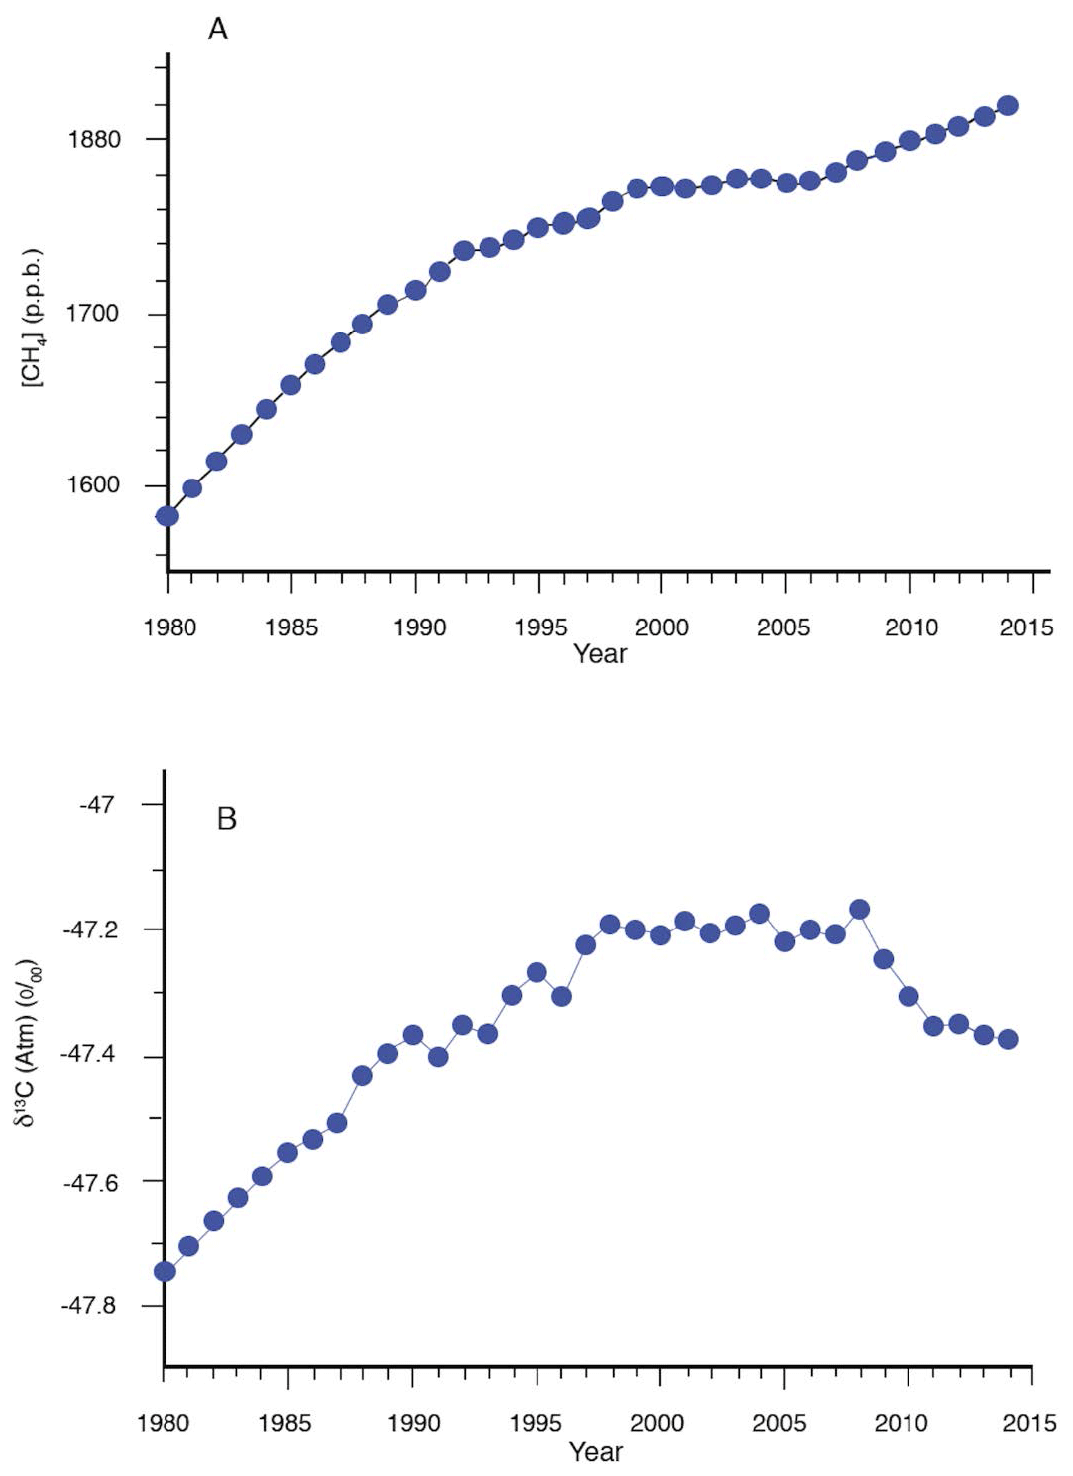 Figure 1: methane emissions rising since 2008, and it's fracking